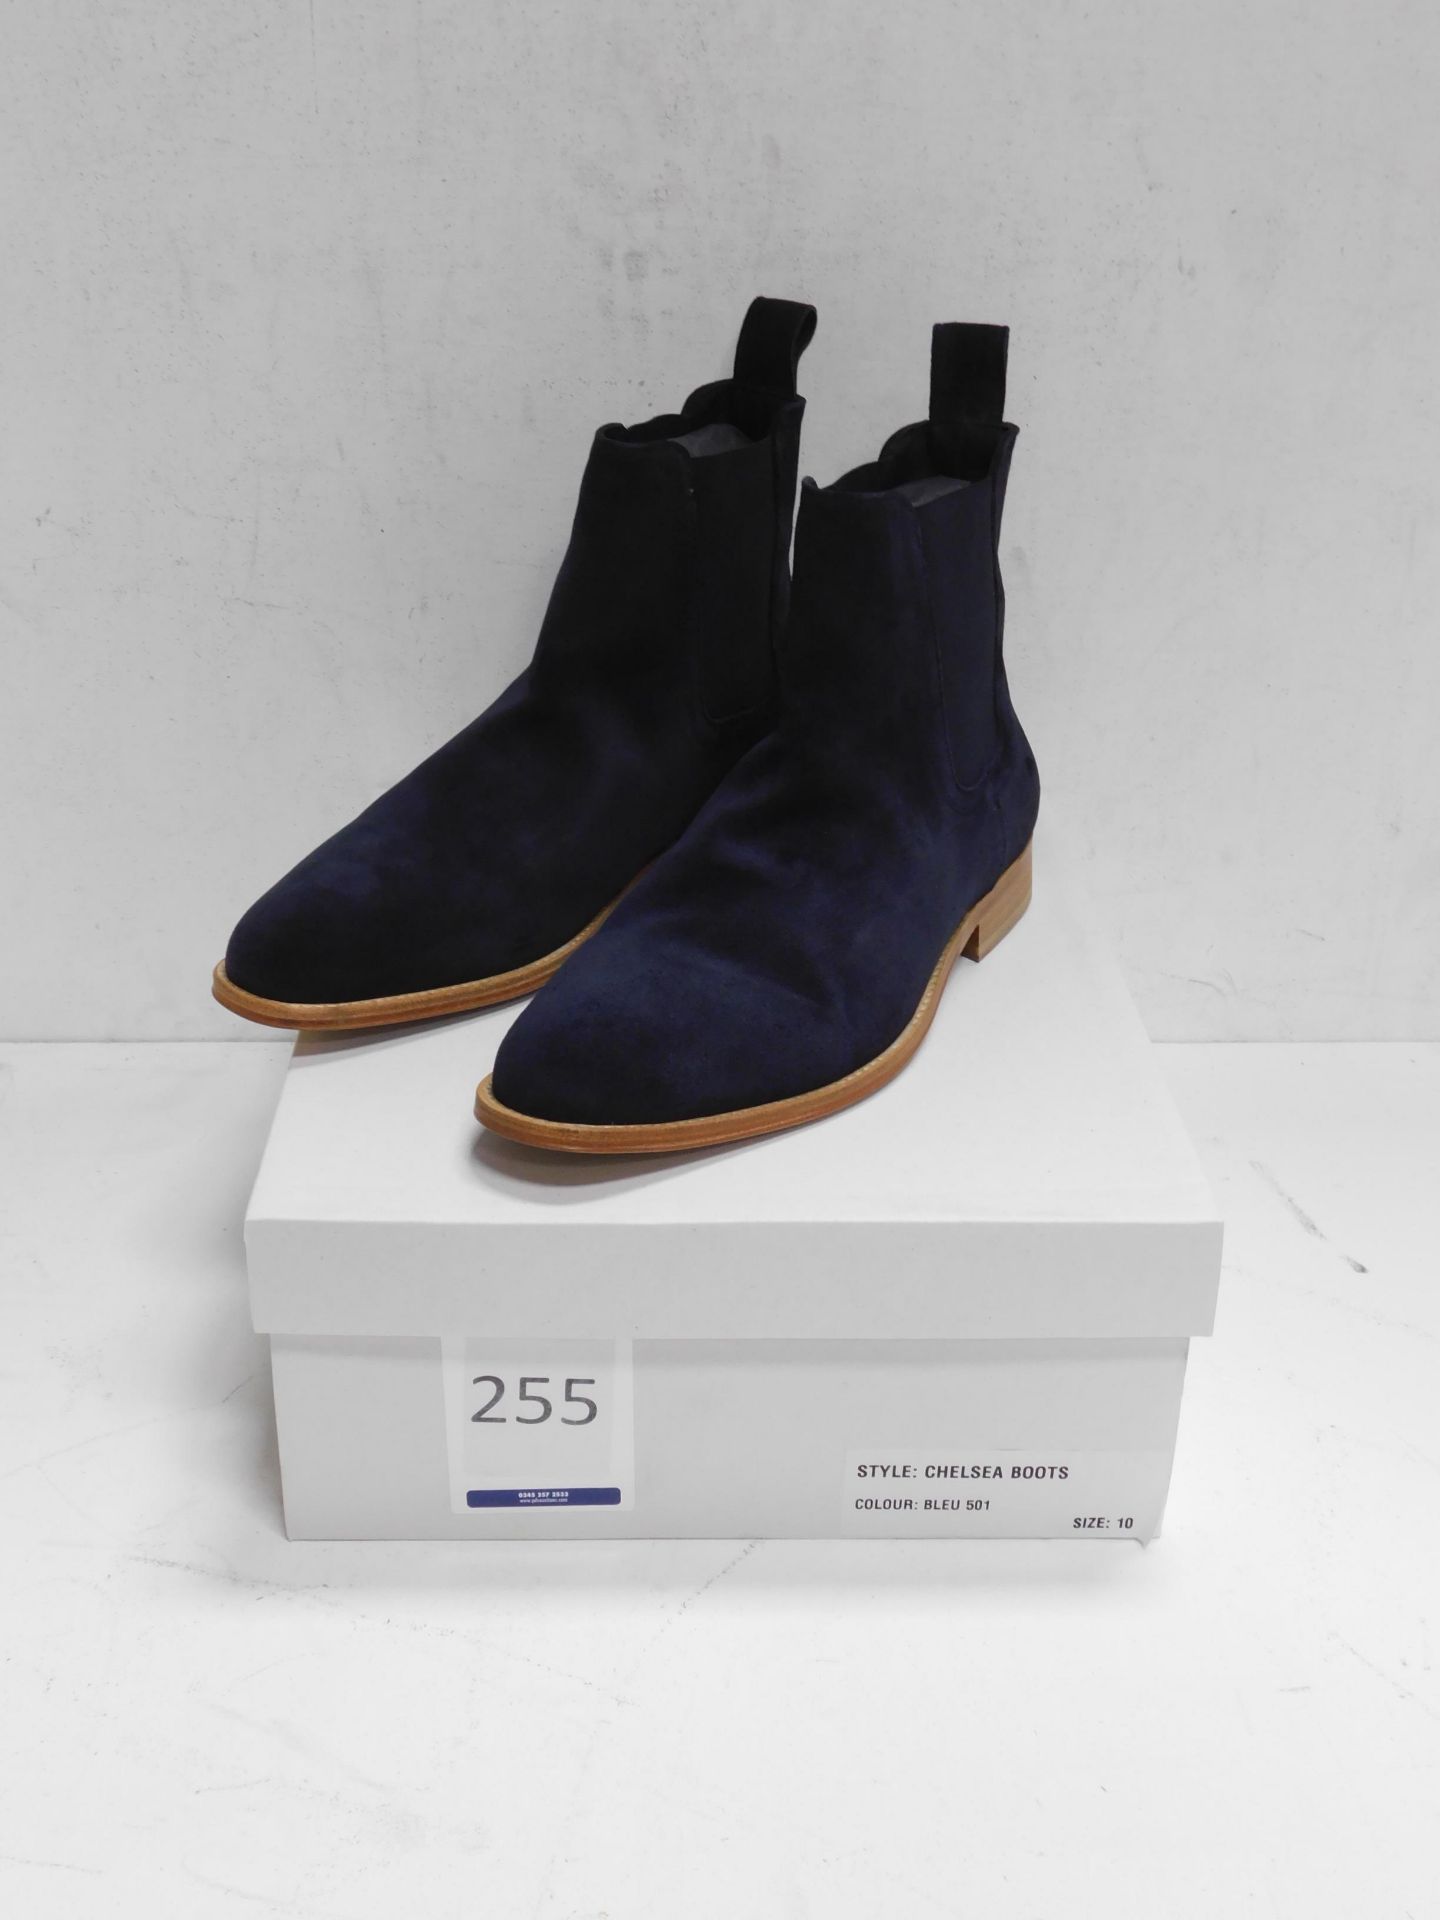 Pair of Ardent “Bleu 501” Chelsea Boots, Size 10 (Located: Brentwood. Please Refer to General